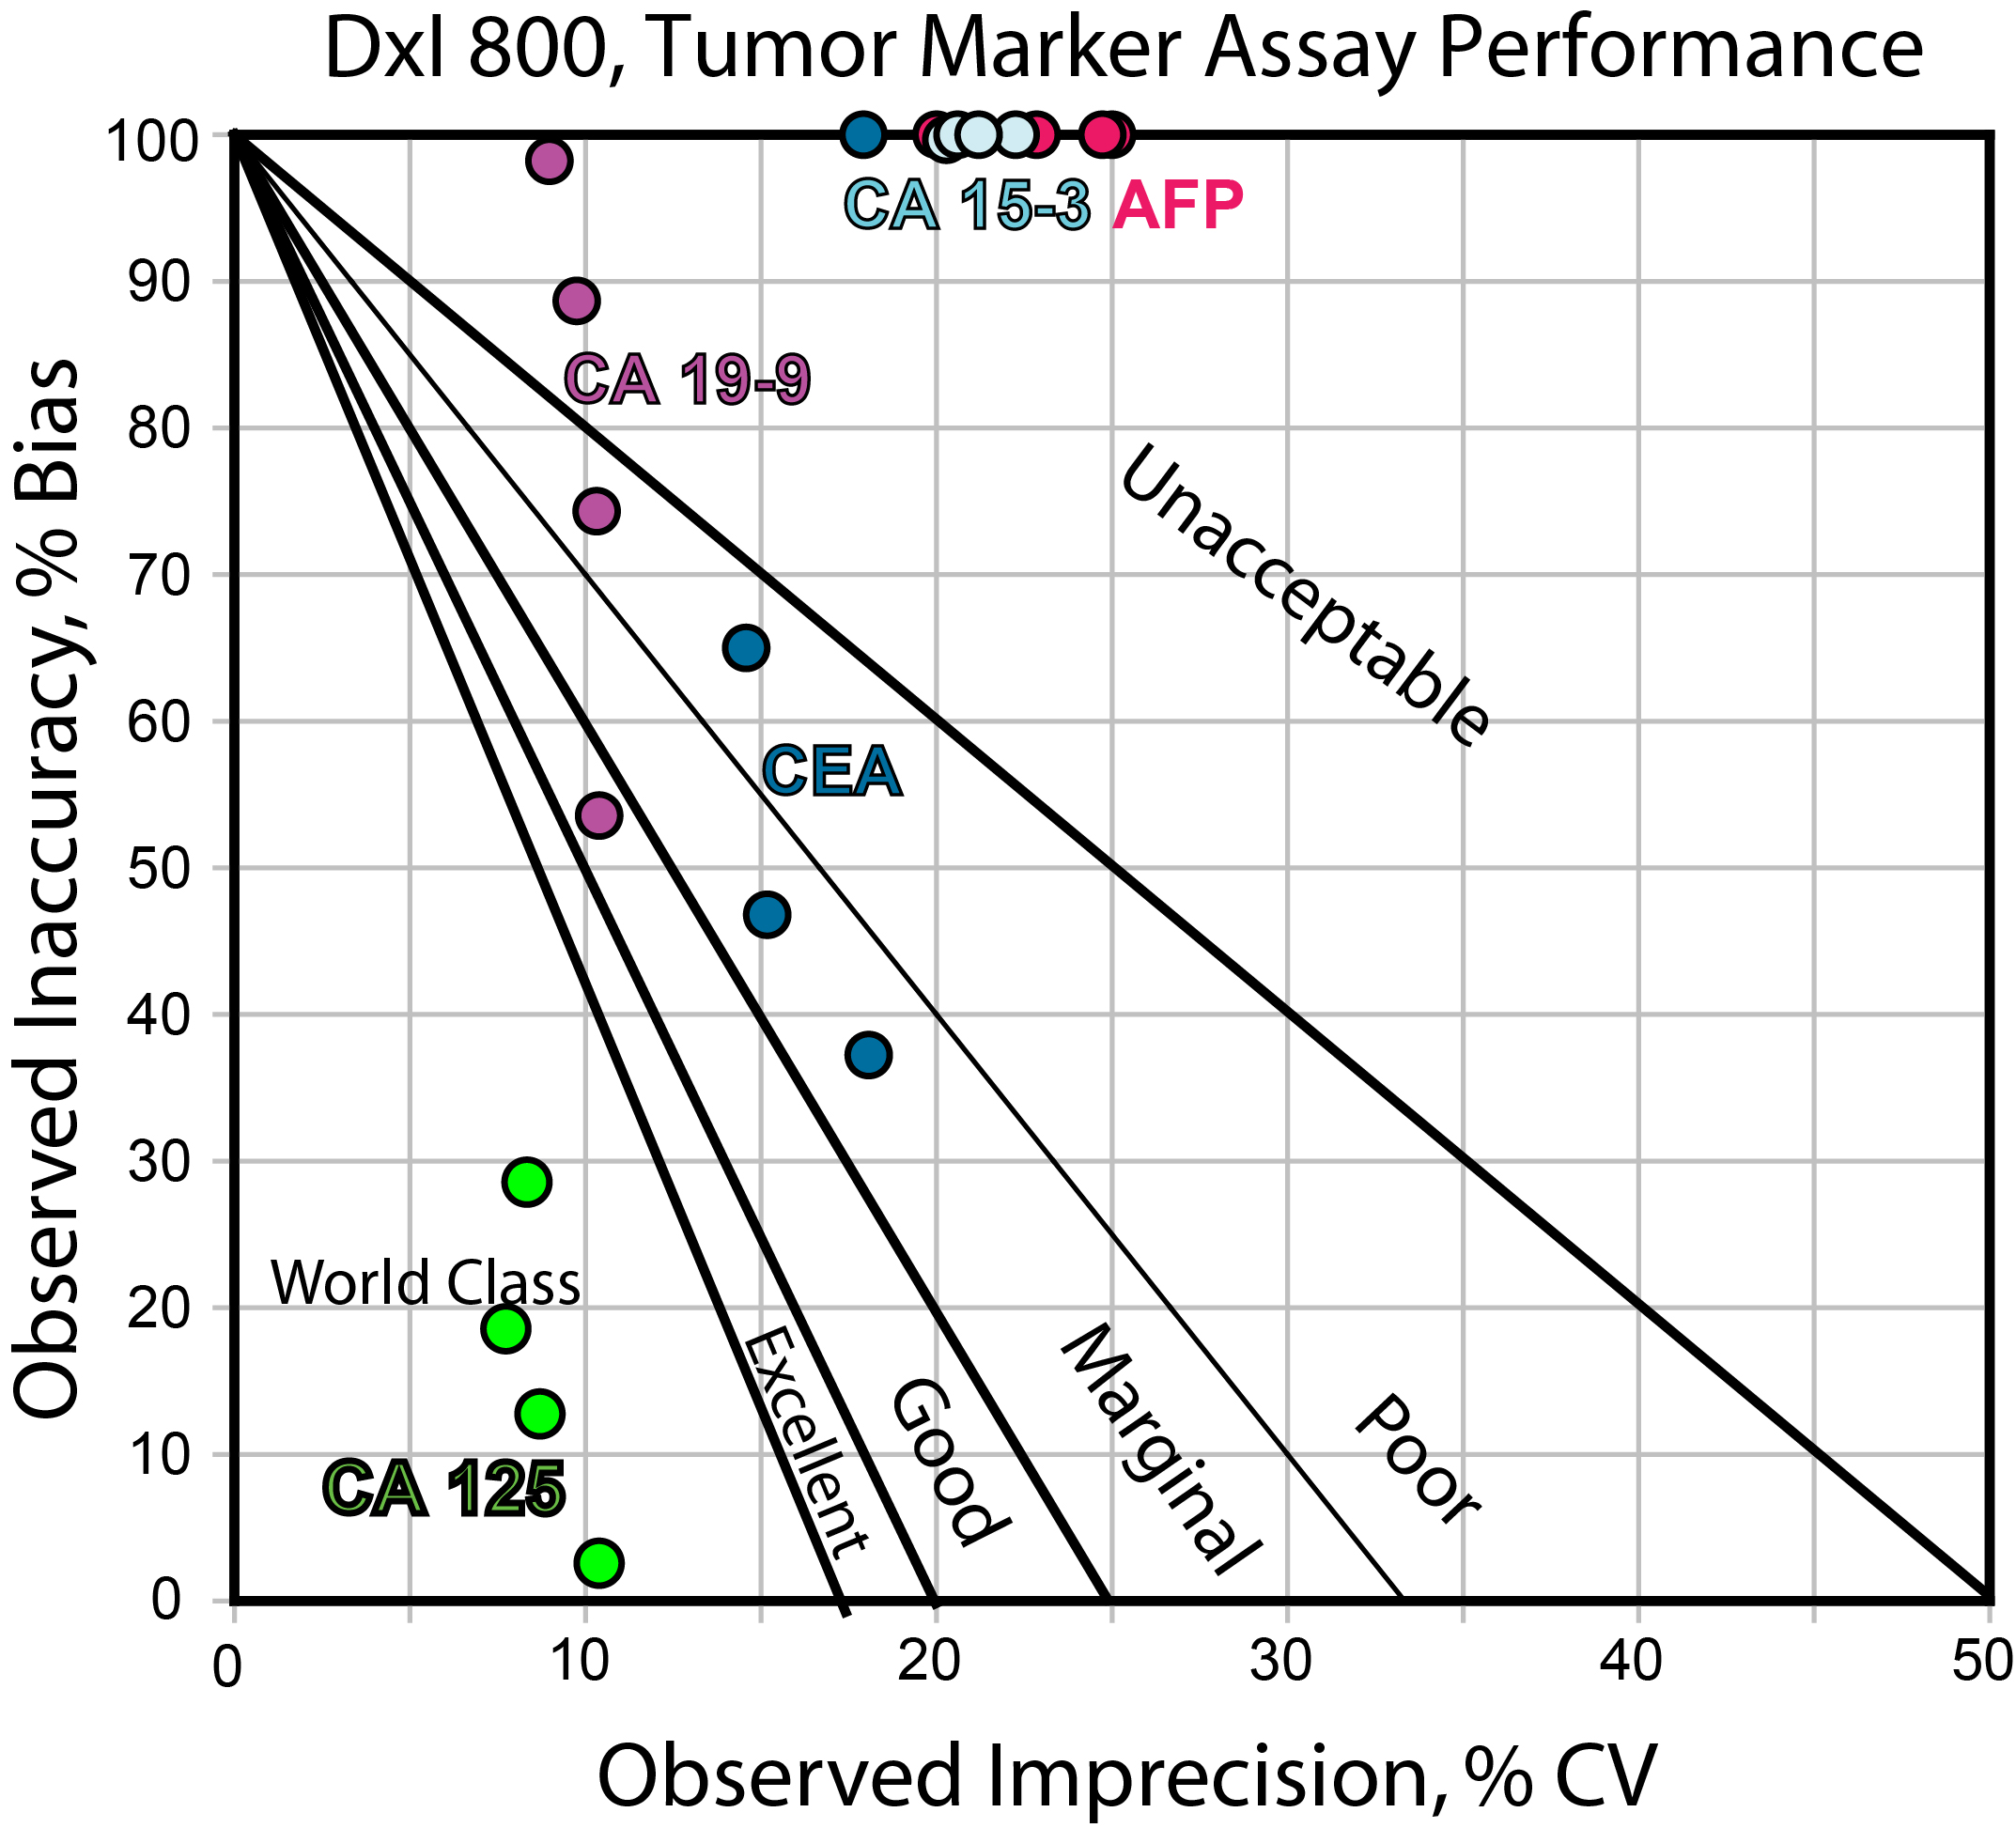 2013-2012-DxI-800-CancerMarkers-NormMedx